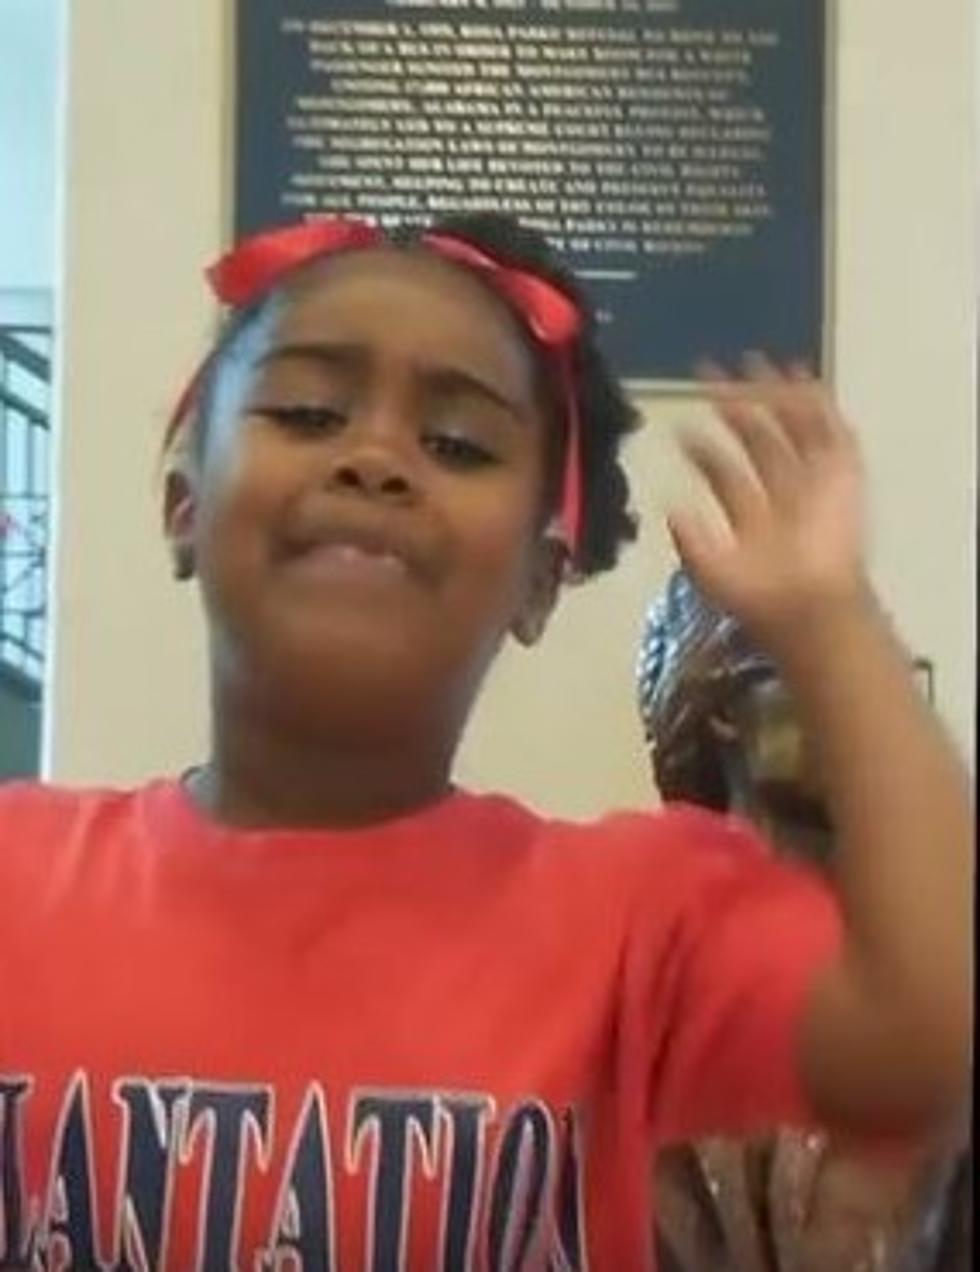 Lafayette First-Grader Wins National “Leader In Me” Grand Prize With Inspirational Speech [VIDEO]